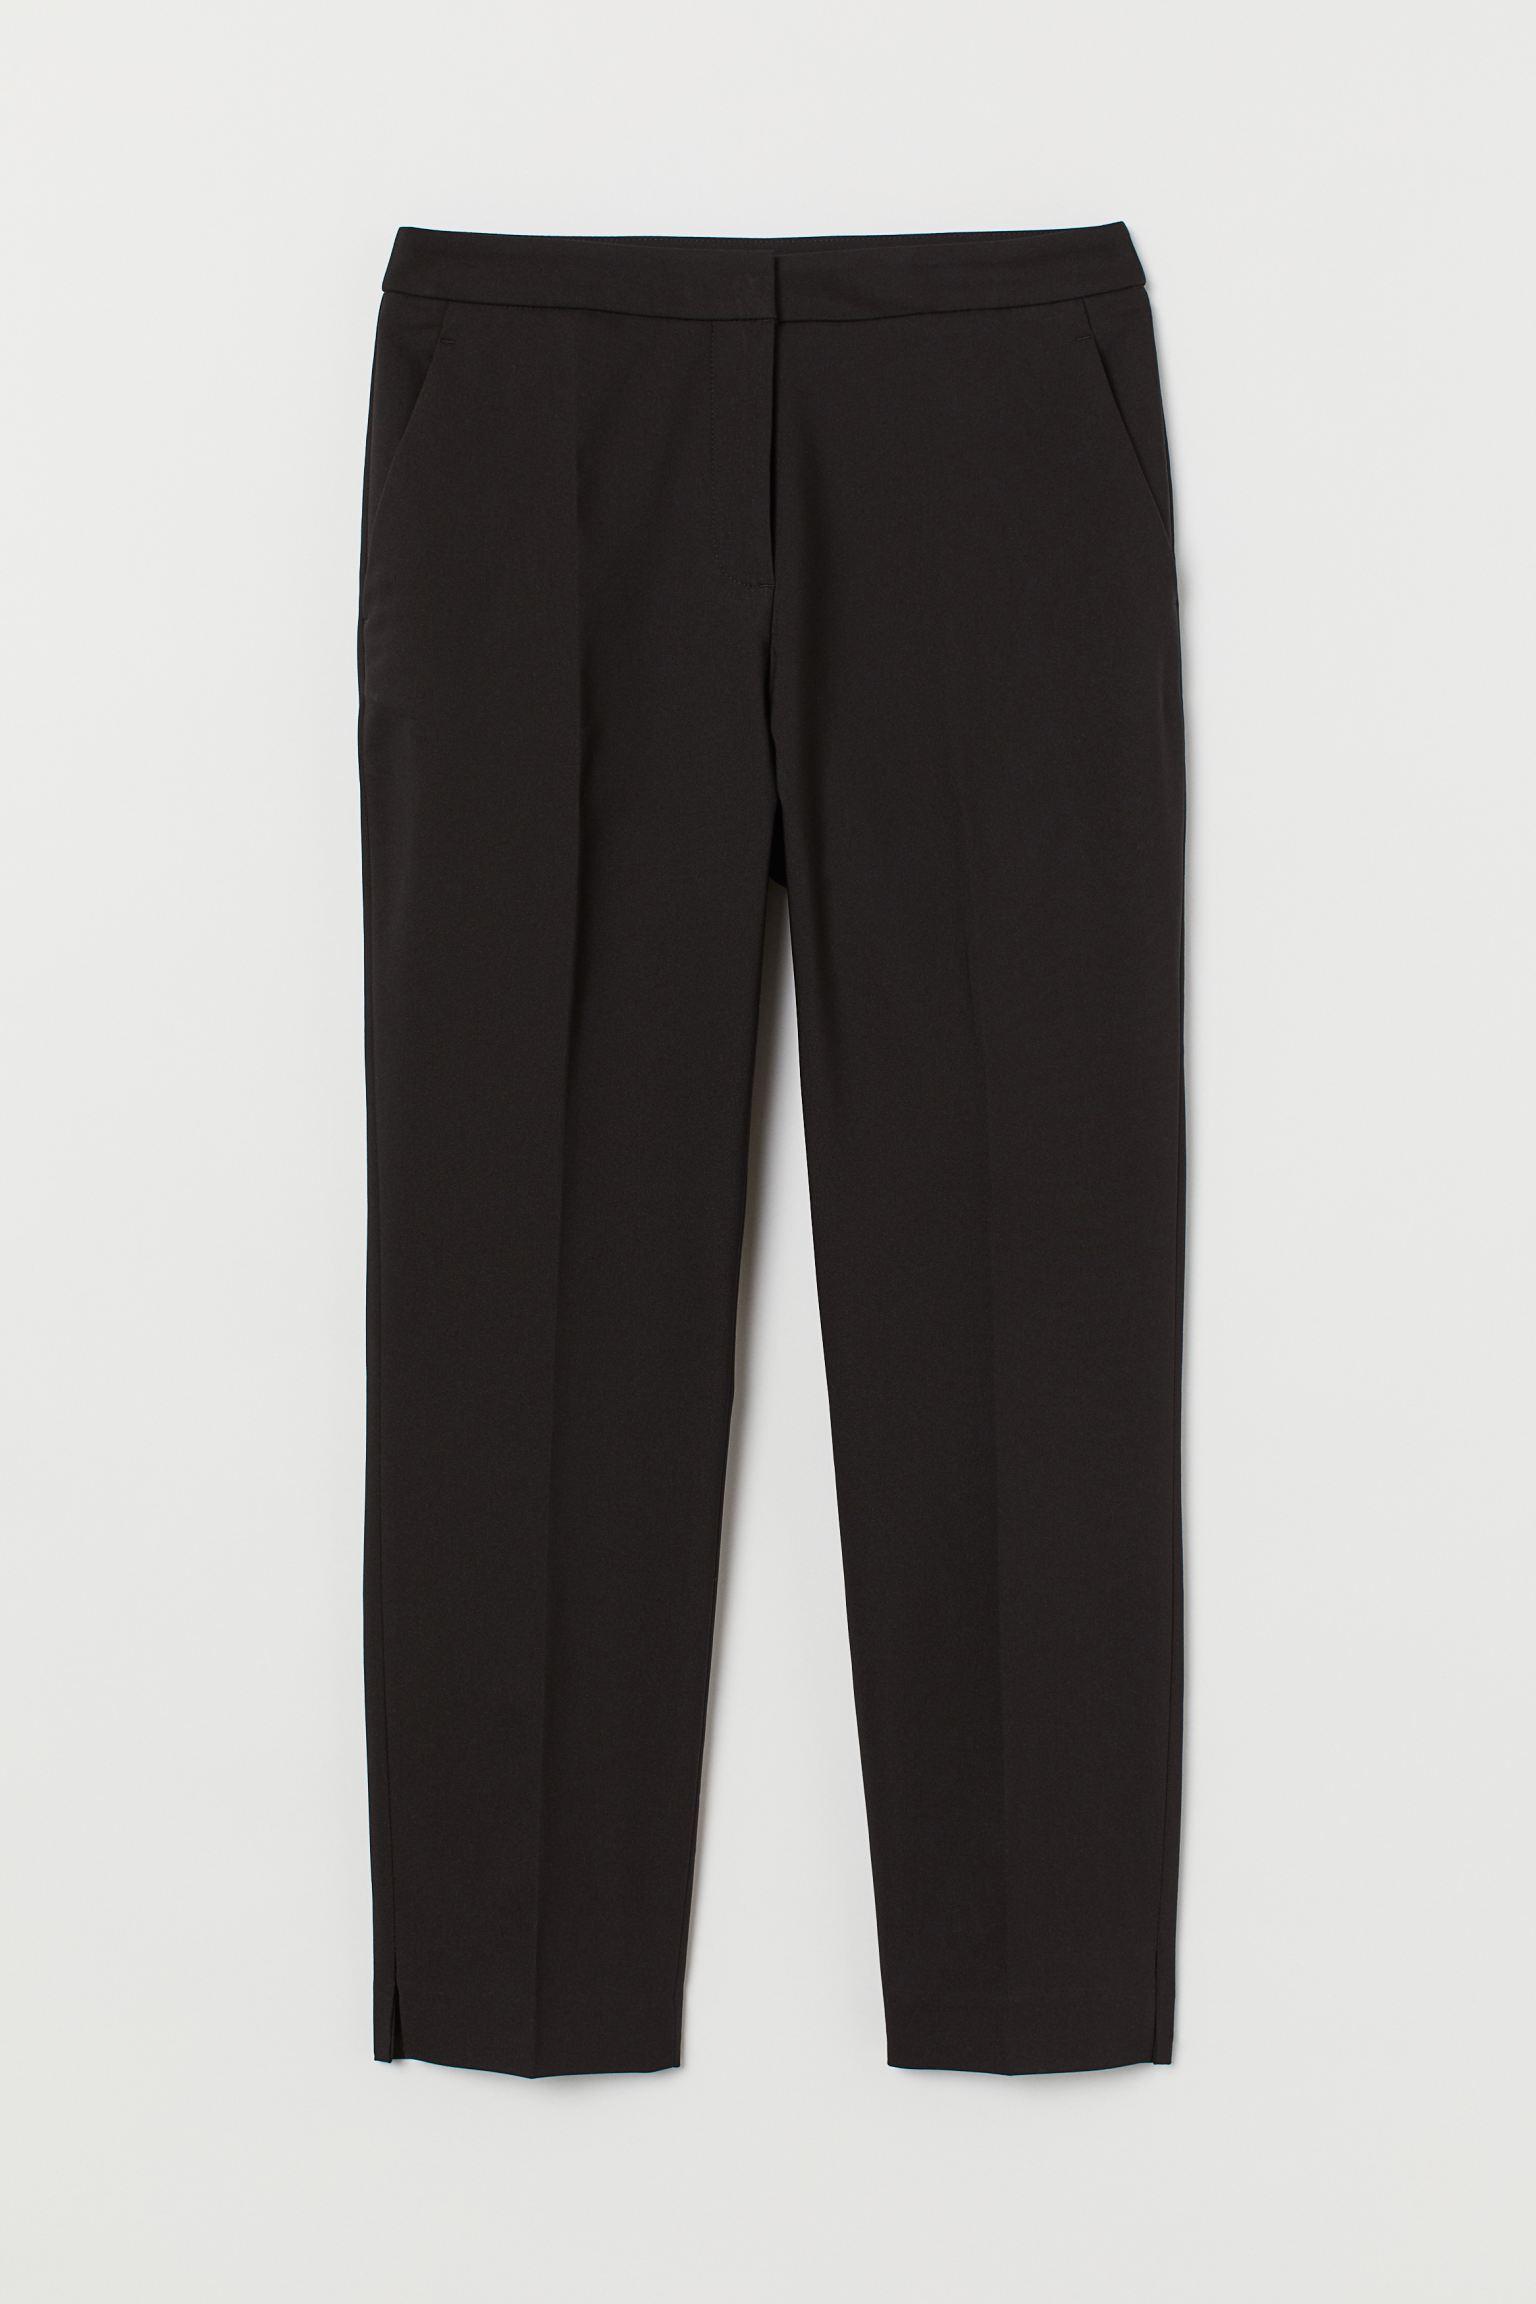 H&M Tailored Trousers